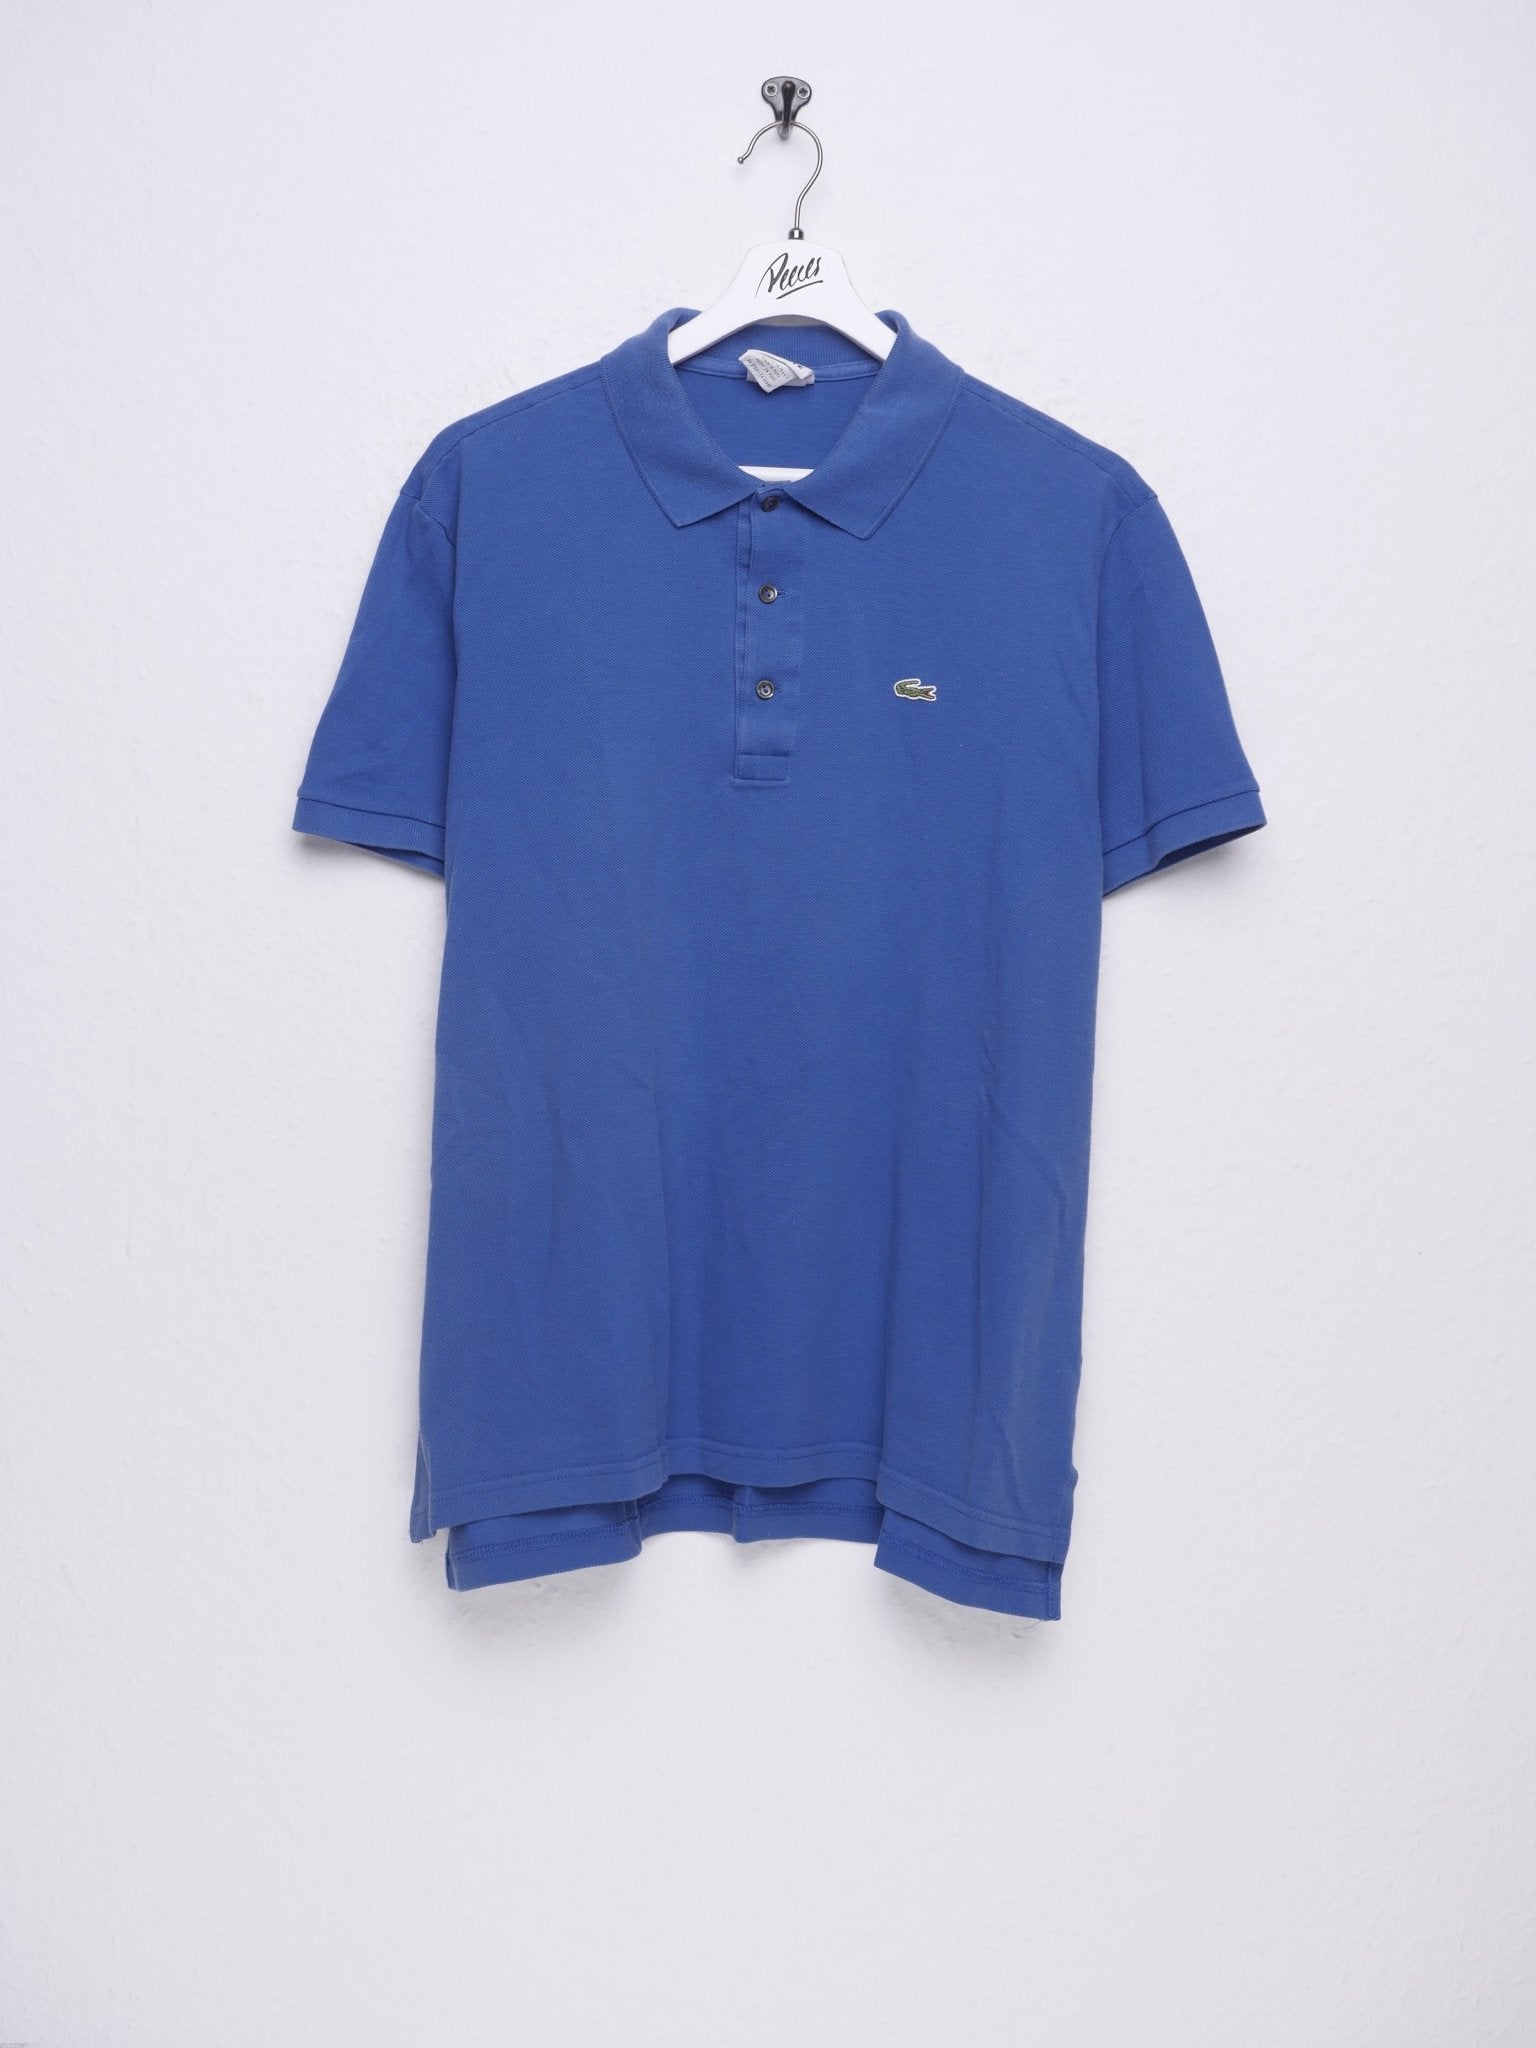 Lacoste embroidered Logo blue S/S Polo Shirt - Peeces